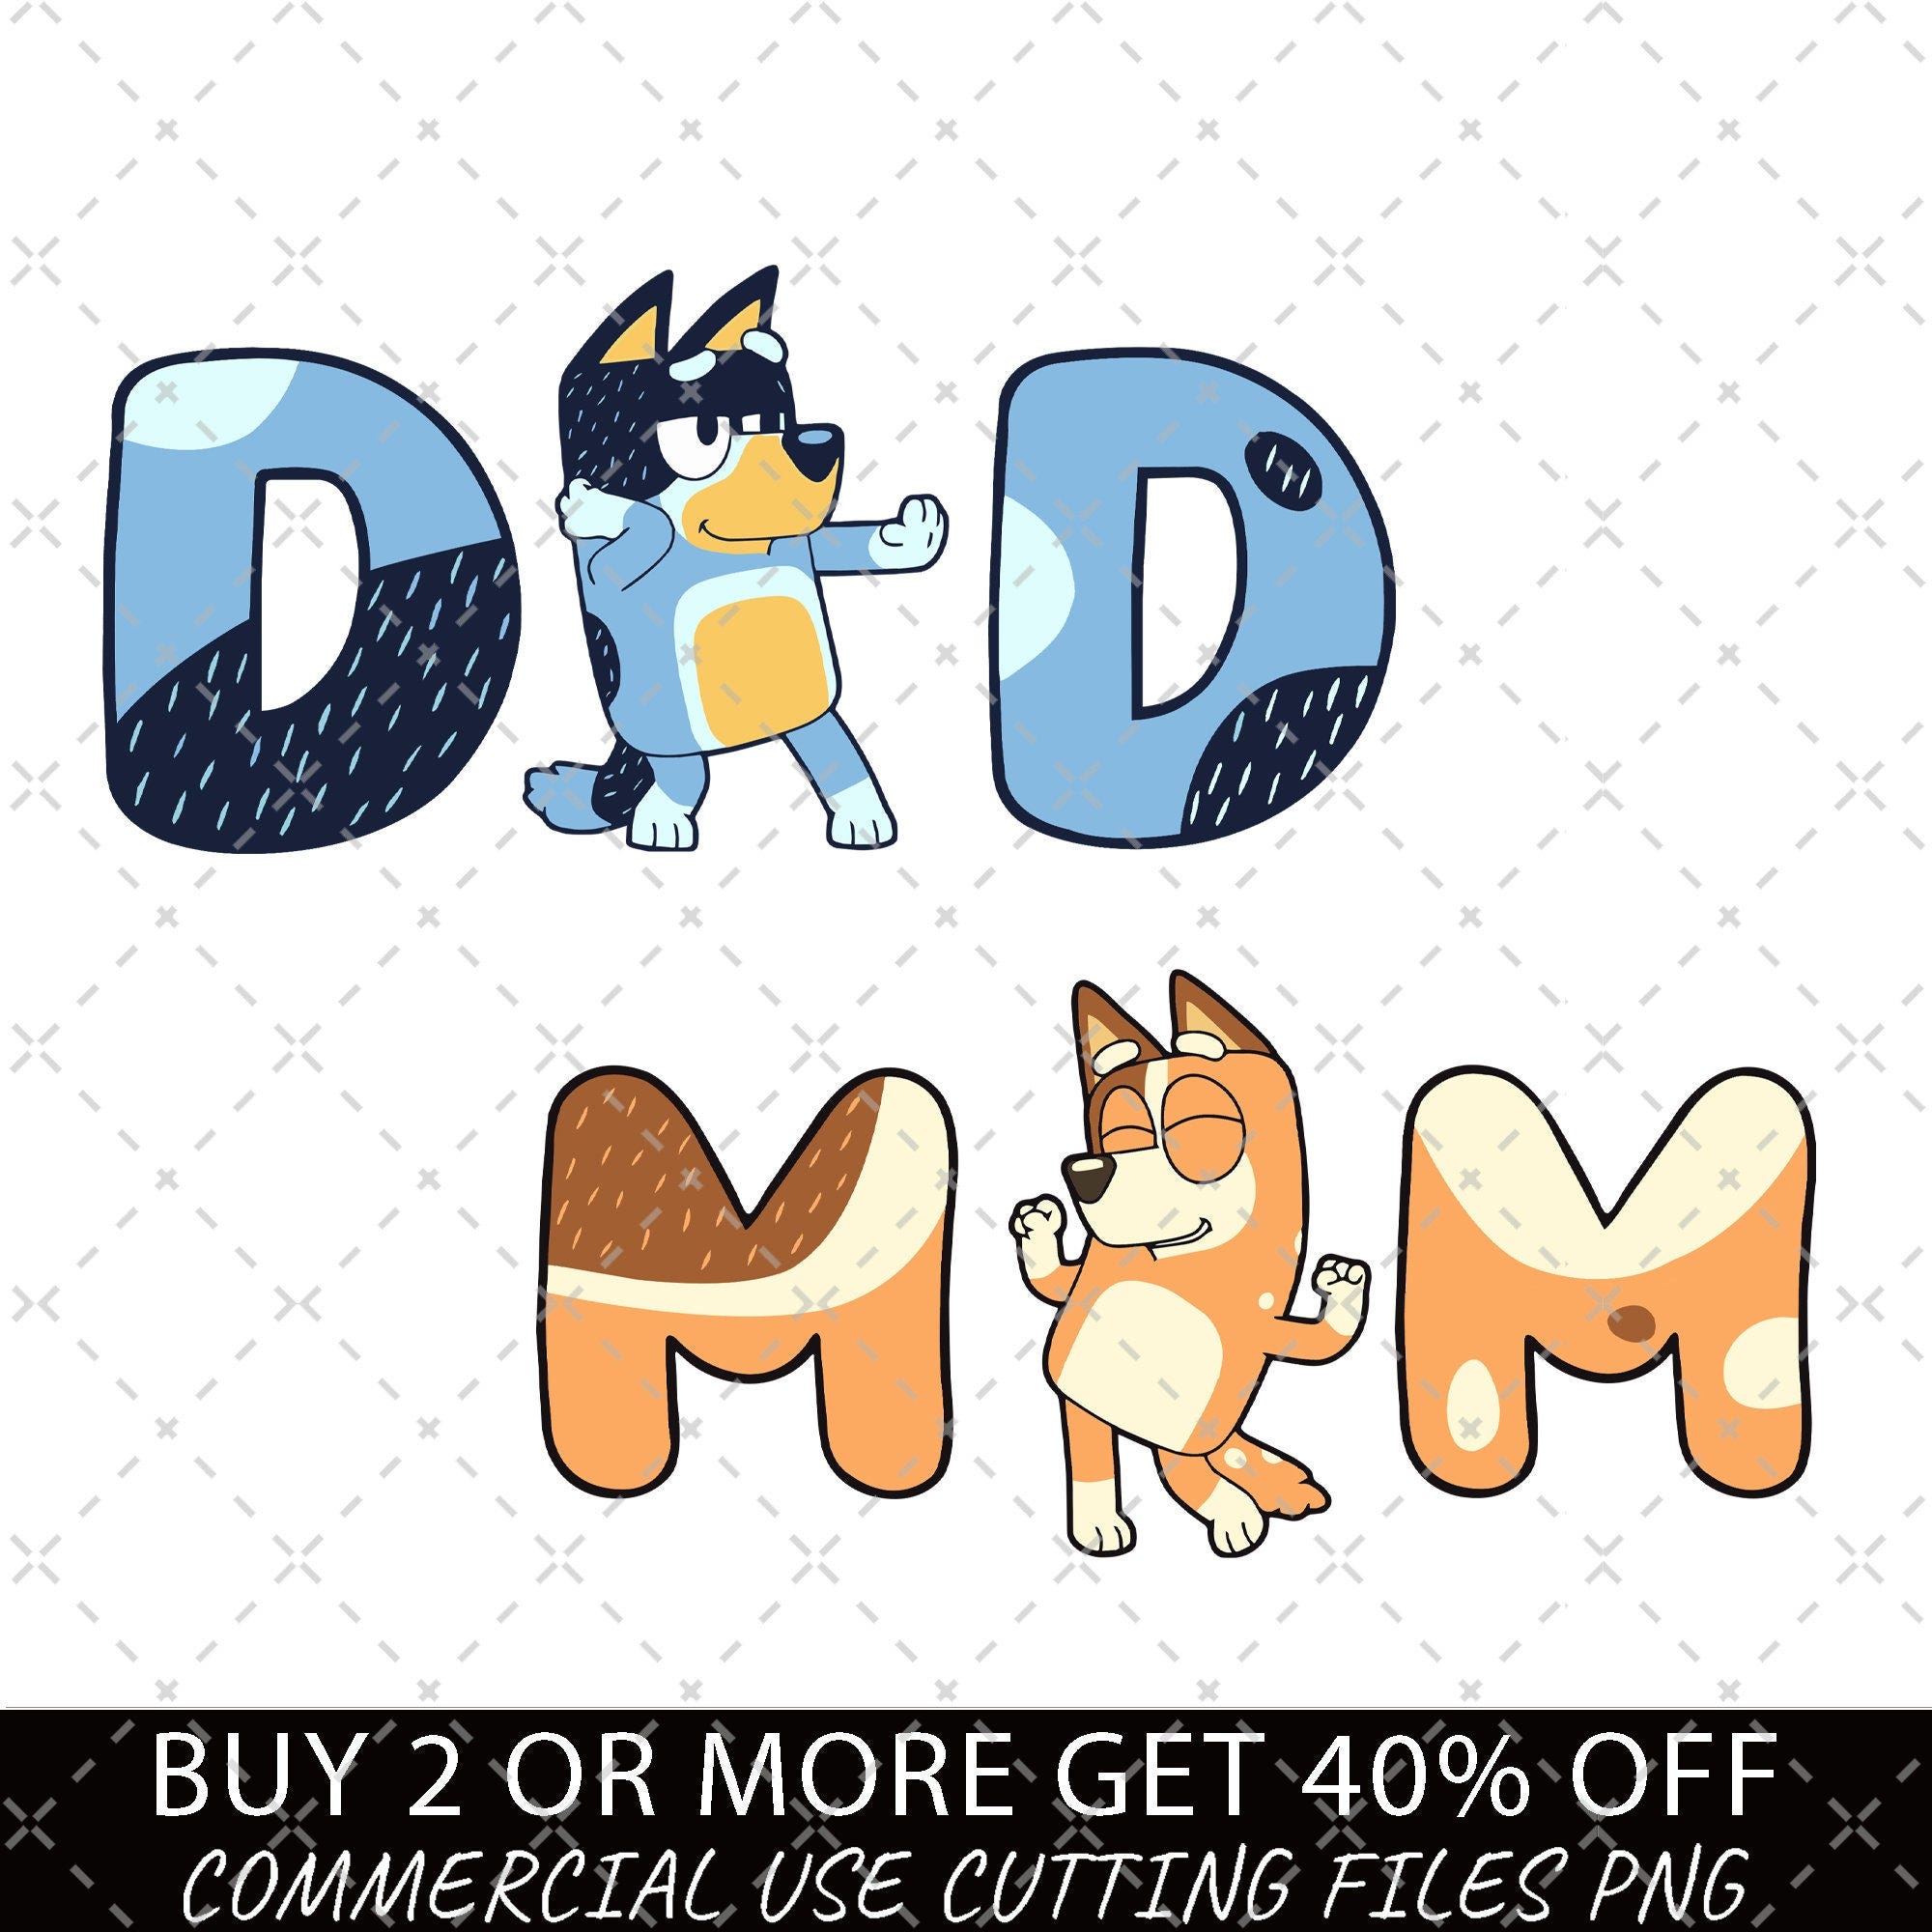 Bluey Mom Png, Bluey Dad PNG, Bluey Family Png, Bluey PNG, Bluey Mum PNG, Dad Mum couple Png, Bluey Fathers Day Png, Bluey Mothers Day Png